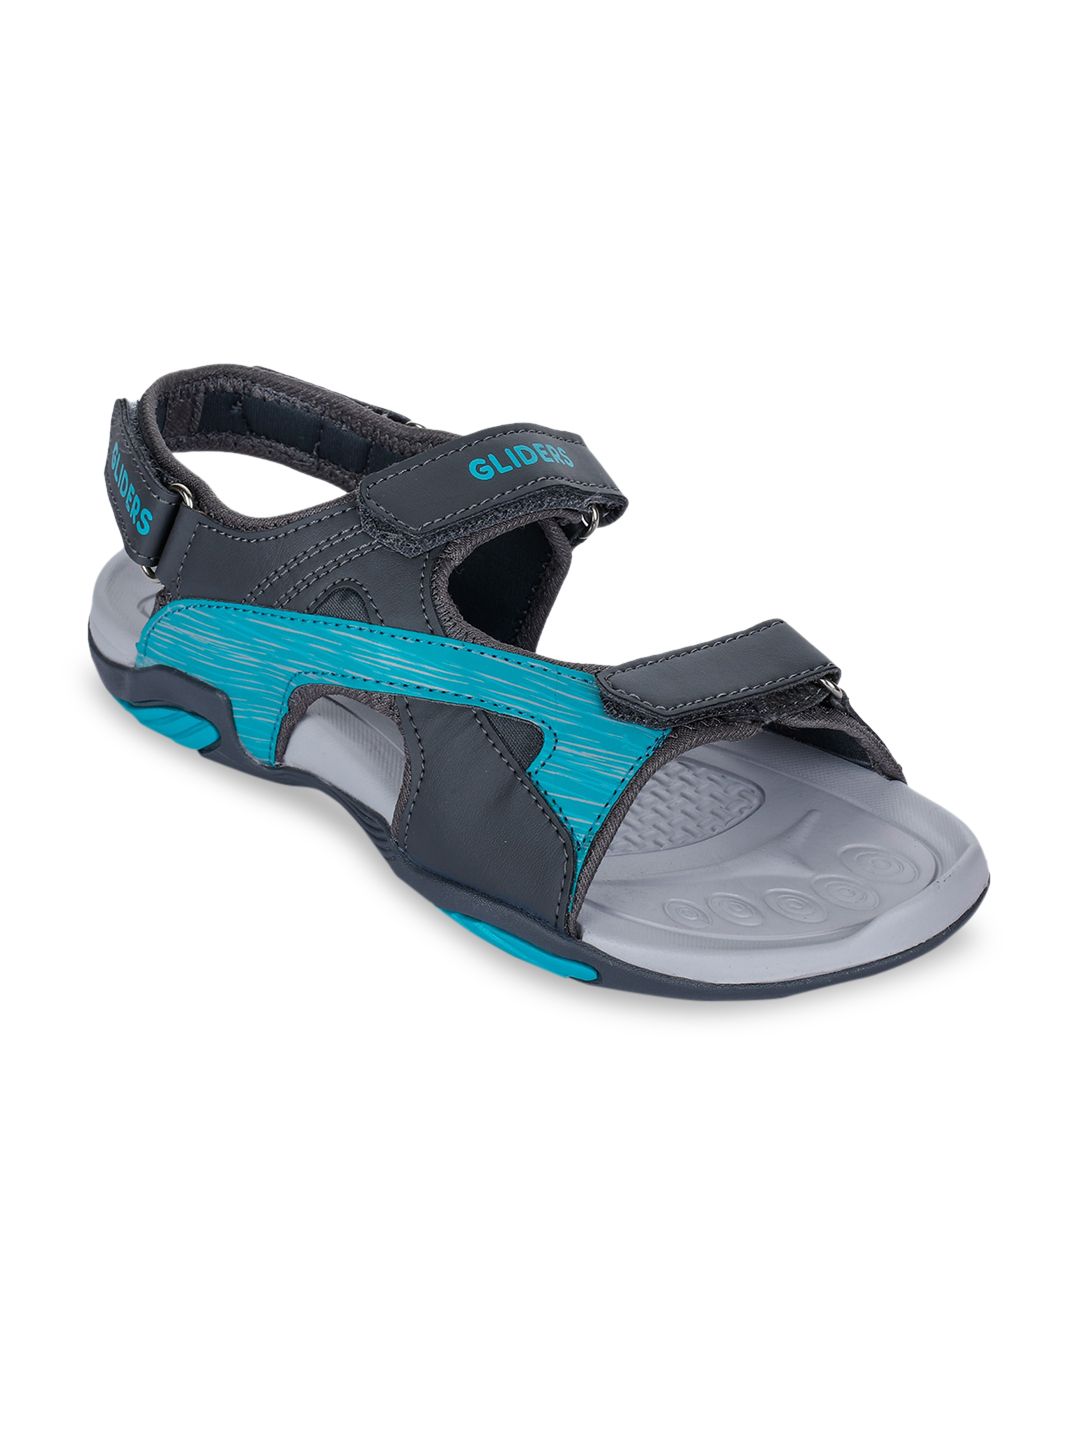 Liberty Women Blue Colourblocked Sports Sandals Price in India